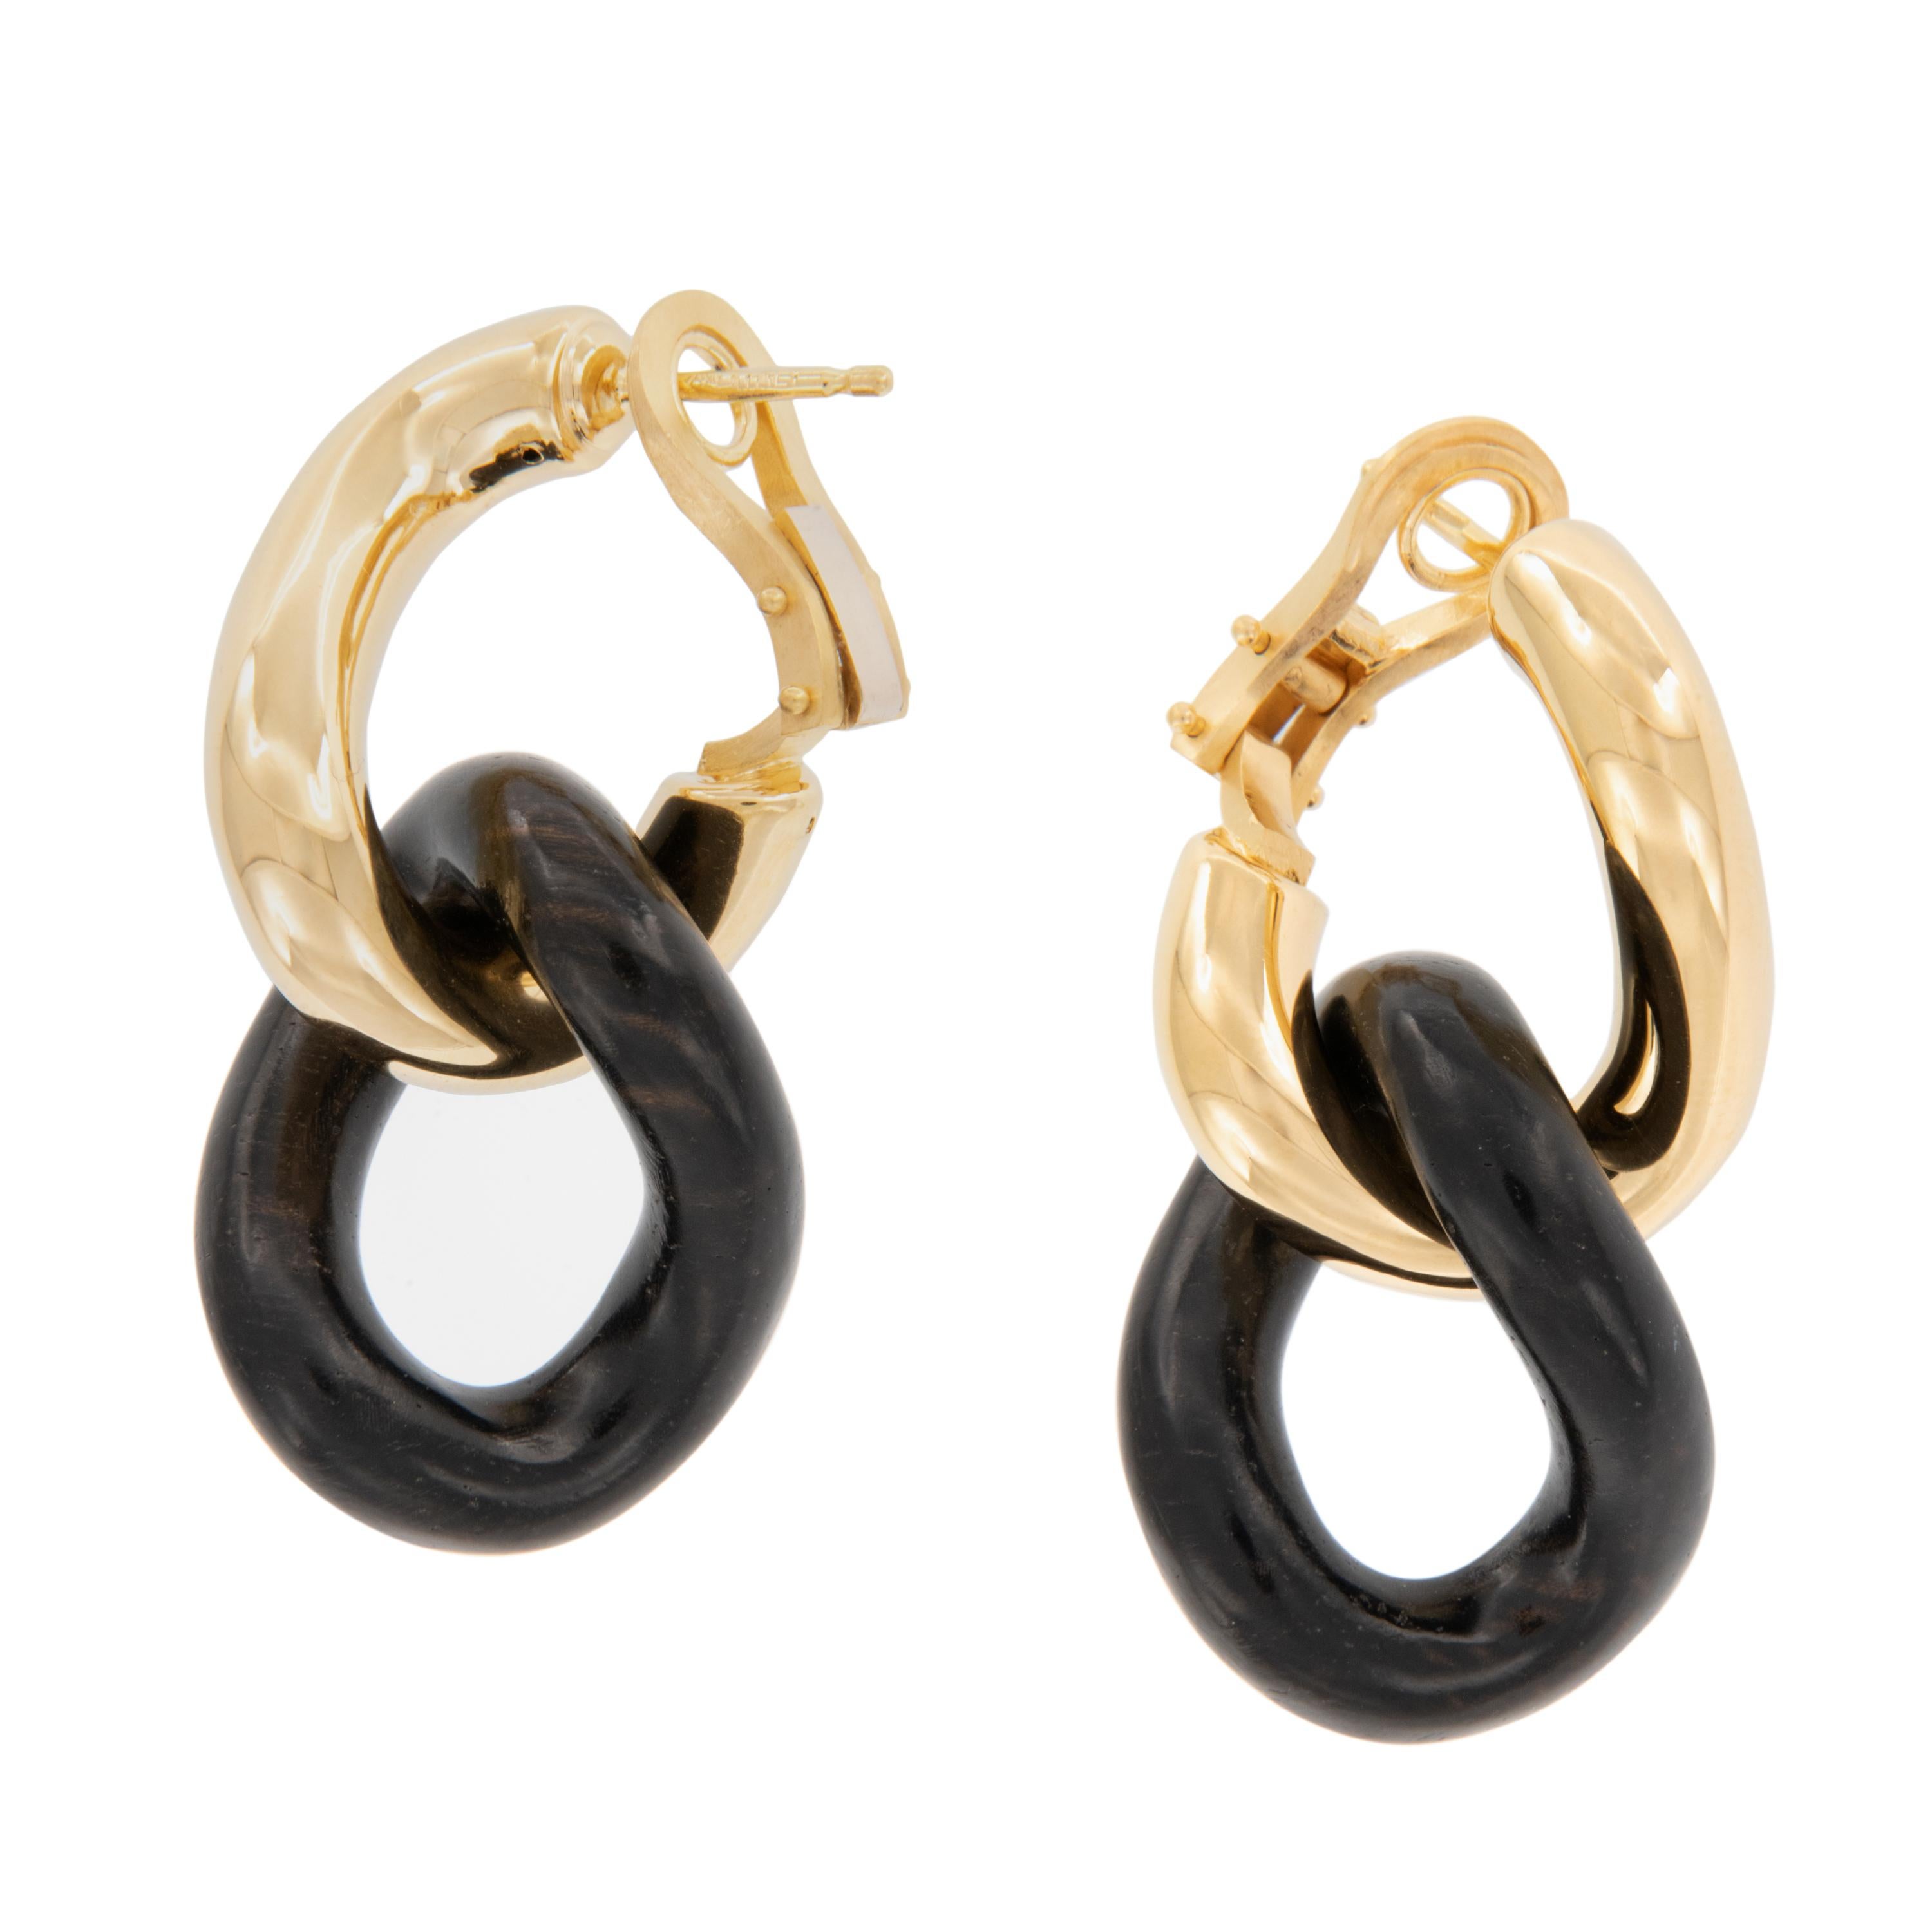 Elegant & timeless, these gorgeous, fine 18 karat yellow gold and ebony twist dangle earrings look fantastic with everything from the office to your little black dress! Ebony is a highly prized, ornamental wood, so dense that it takes a bright